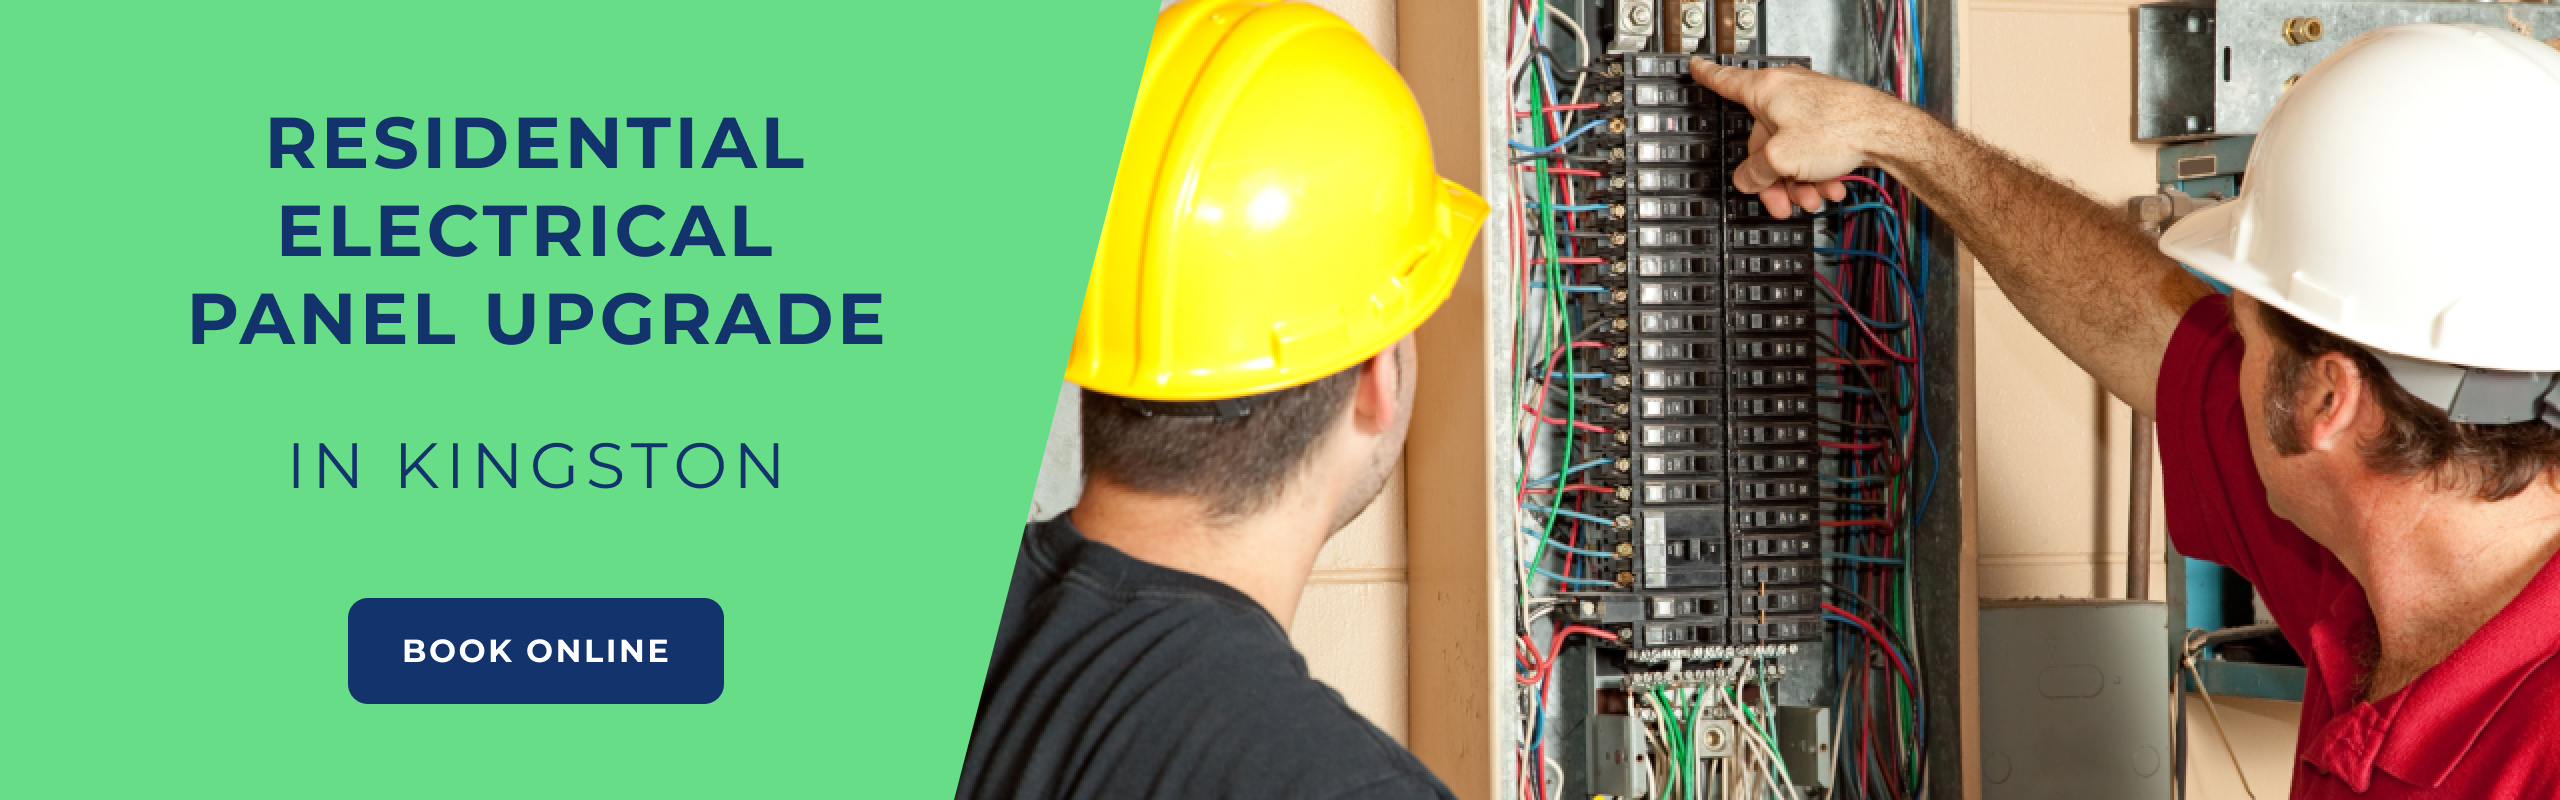 Electrical Panel Upgrade in Kingston:Save up to 25% on residential electrical services